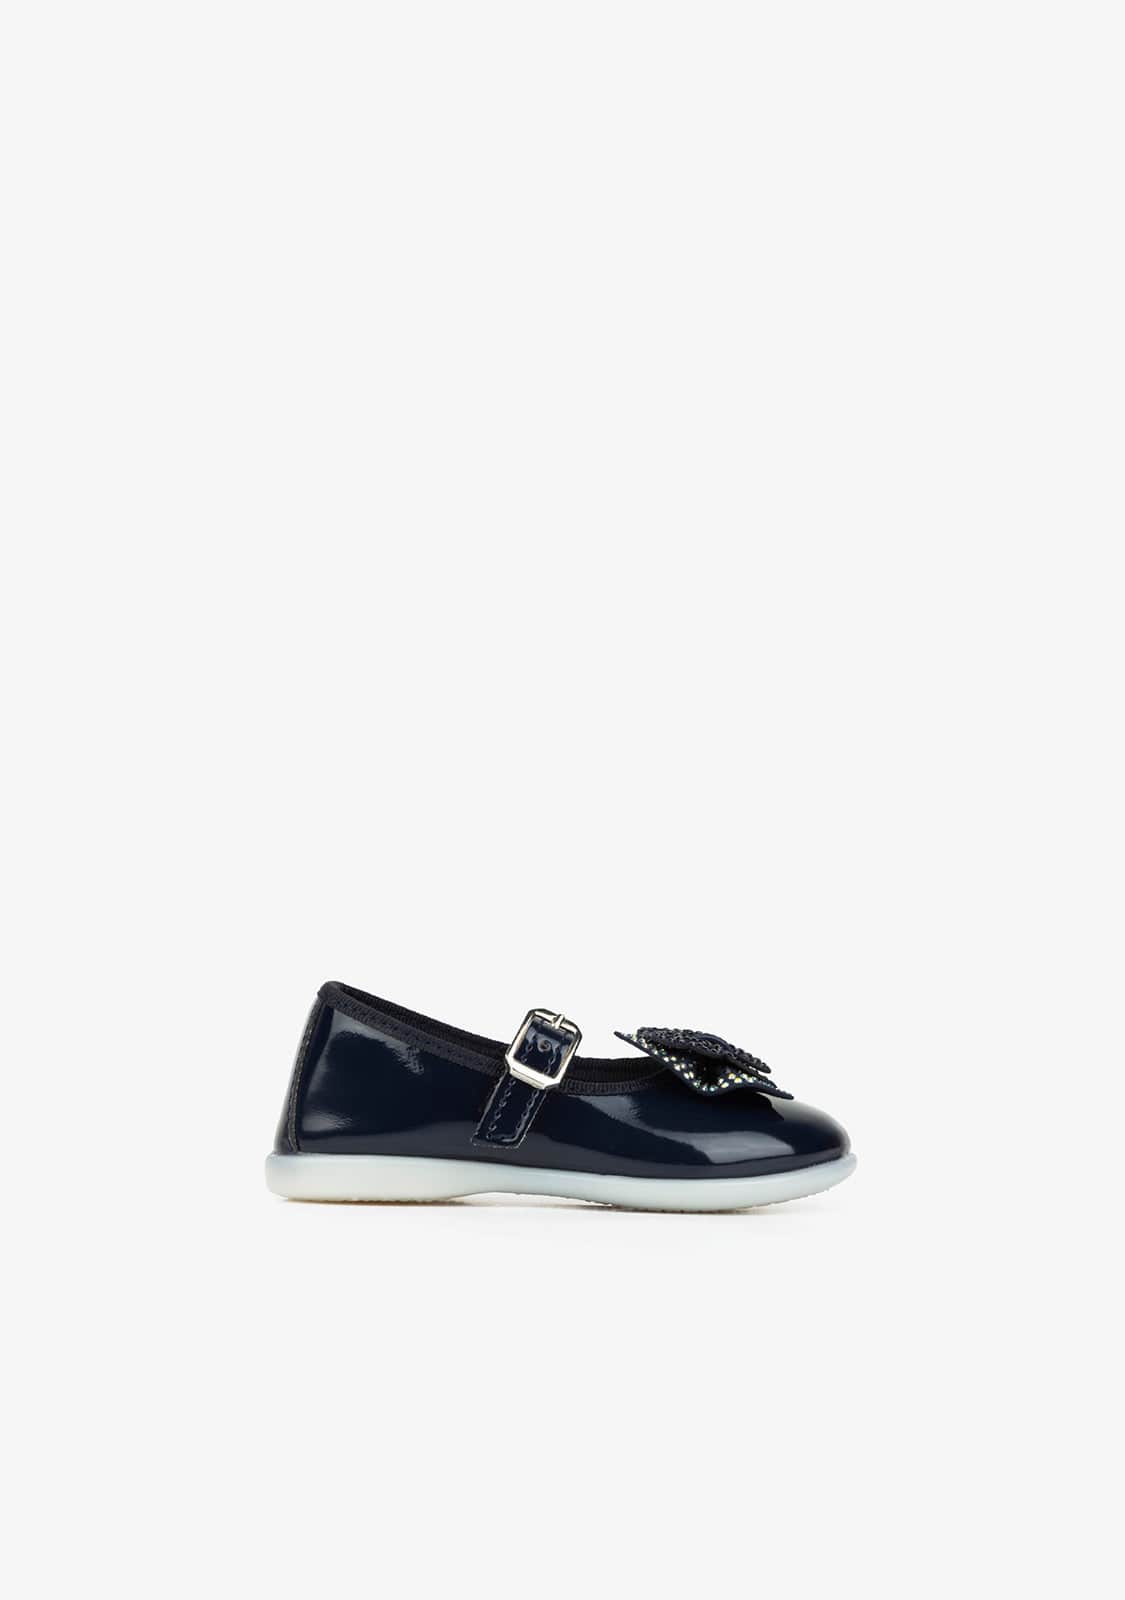 OSITO Shoes Baby's Navy Strass Bow Mary Janes